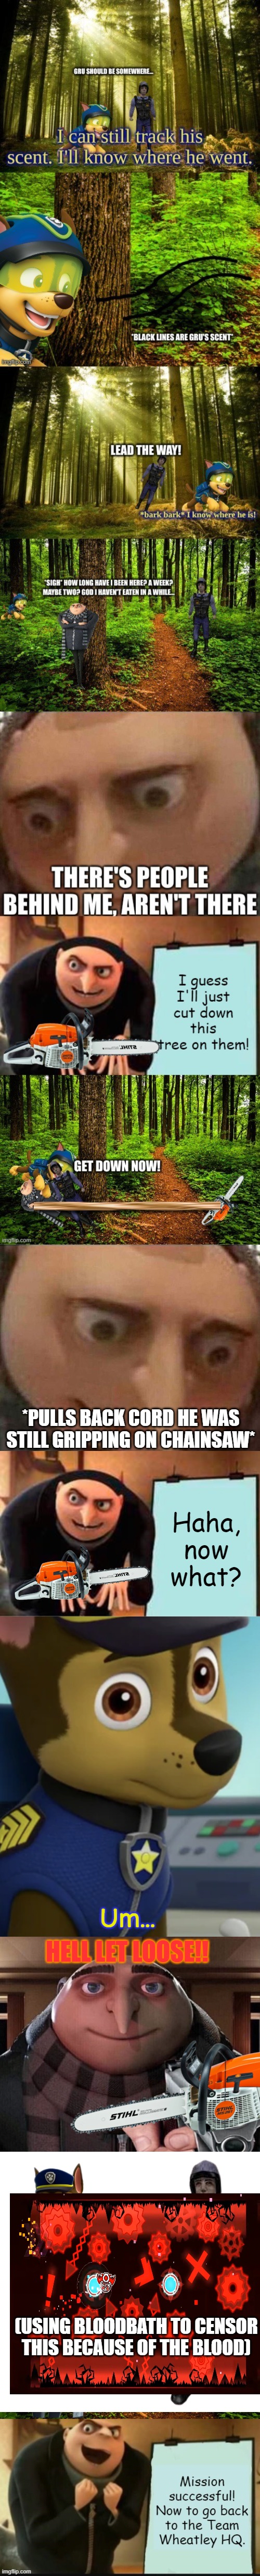 Gru can just chainsaw them | *PULLS BACK CORD HE WAS STILL GRIPPING ON CHAINSAW*; Haha, now what? Um... HELL LET LOOSE!! (USING BLOODBATH TO CENSOR THIS BECAUSE OF THE BLOOD) | image tagged in gru meme,memes,gru's plan,chase staring,gru gun,blank transparent square | made w/ Imgflip meme maker